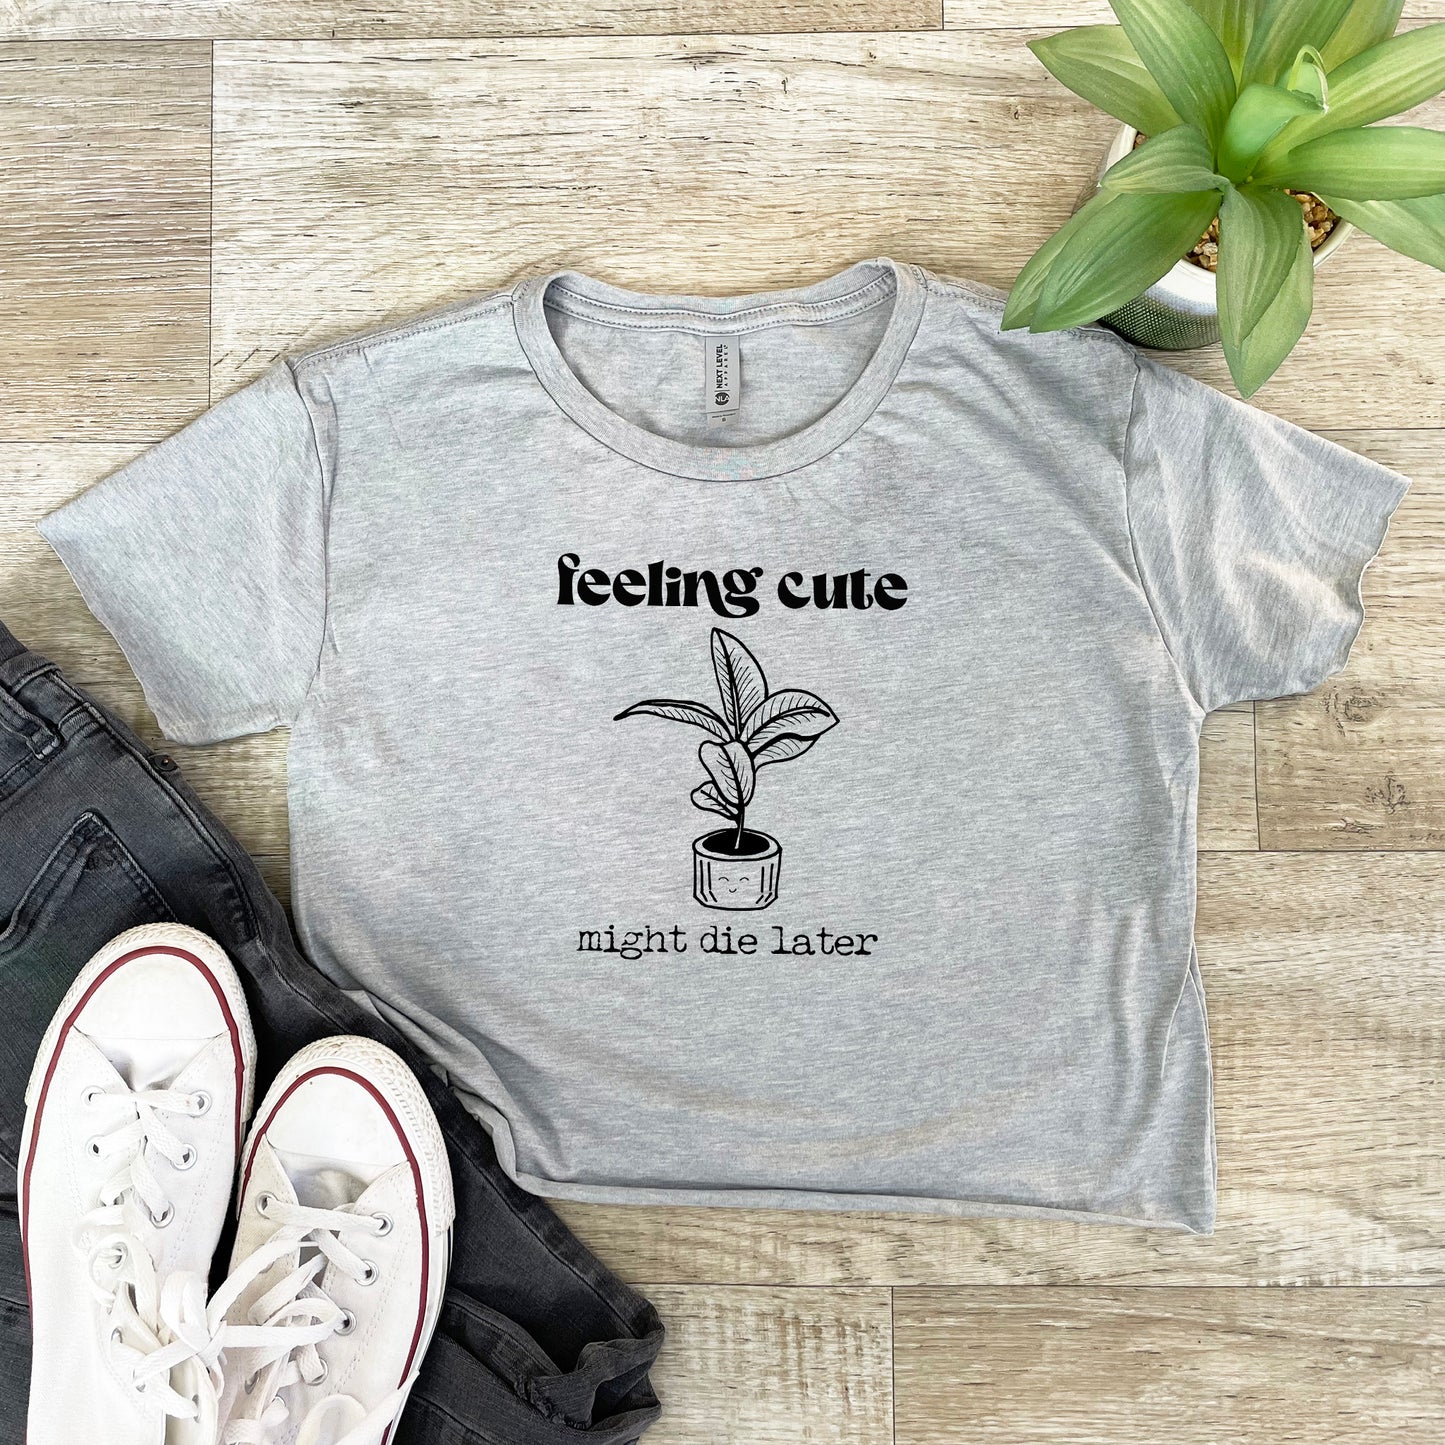 a t - shirt that says feeling cute might be later next to a pair of